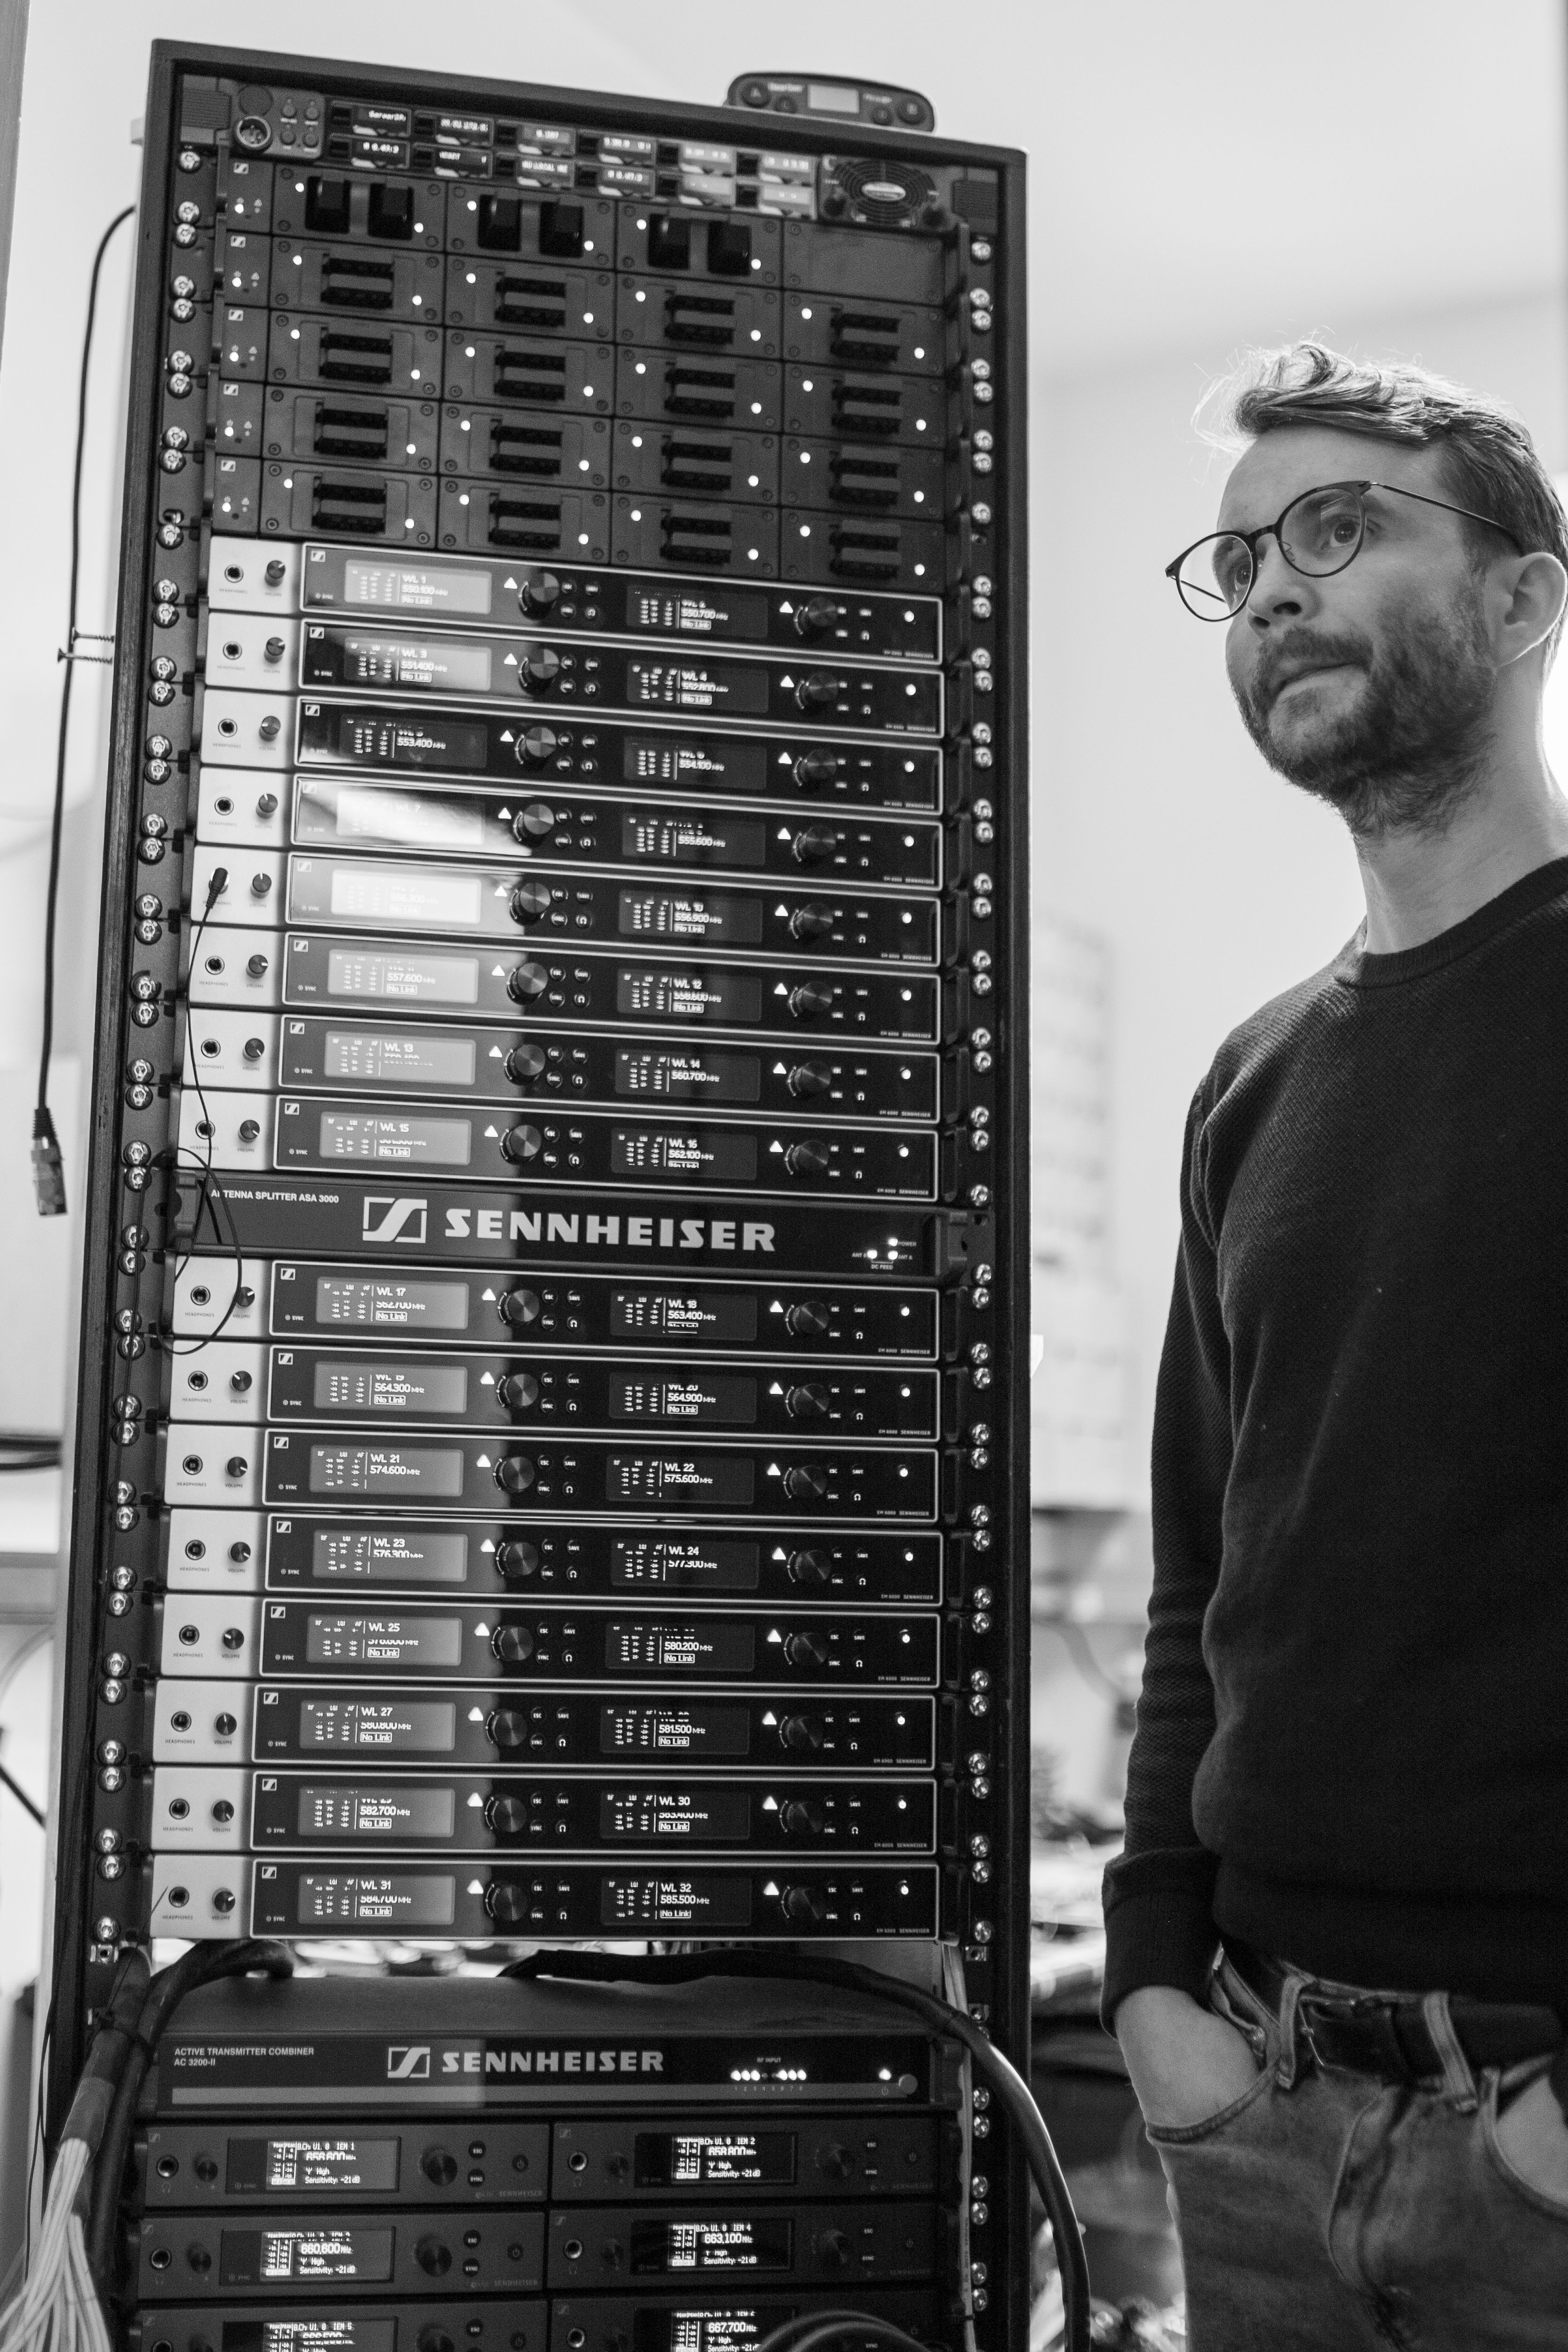 Kristinn Gauti Einarsson, Head of Sound at the National Theatre of Iceland, next to the Sennheiser Digital 6000 racks. At the top: L 6000 charging units, which can be fitted with the respective inserts for all transmitters in the Digital 6000 series